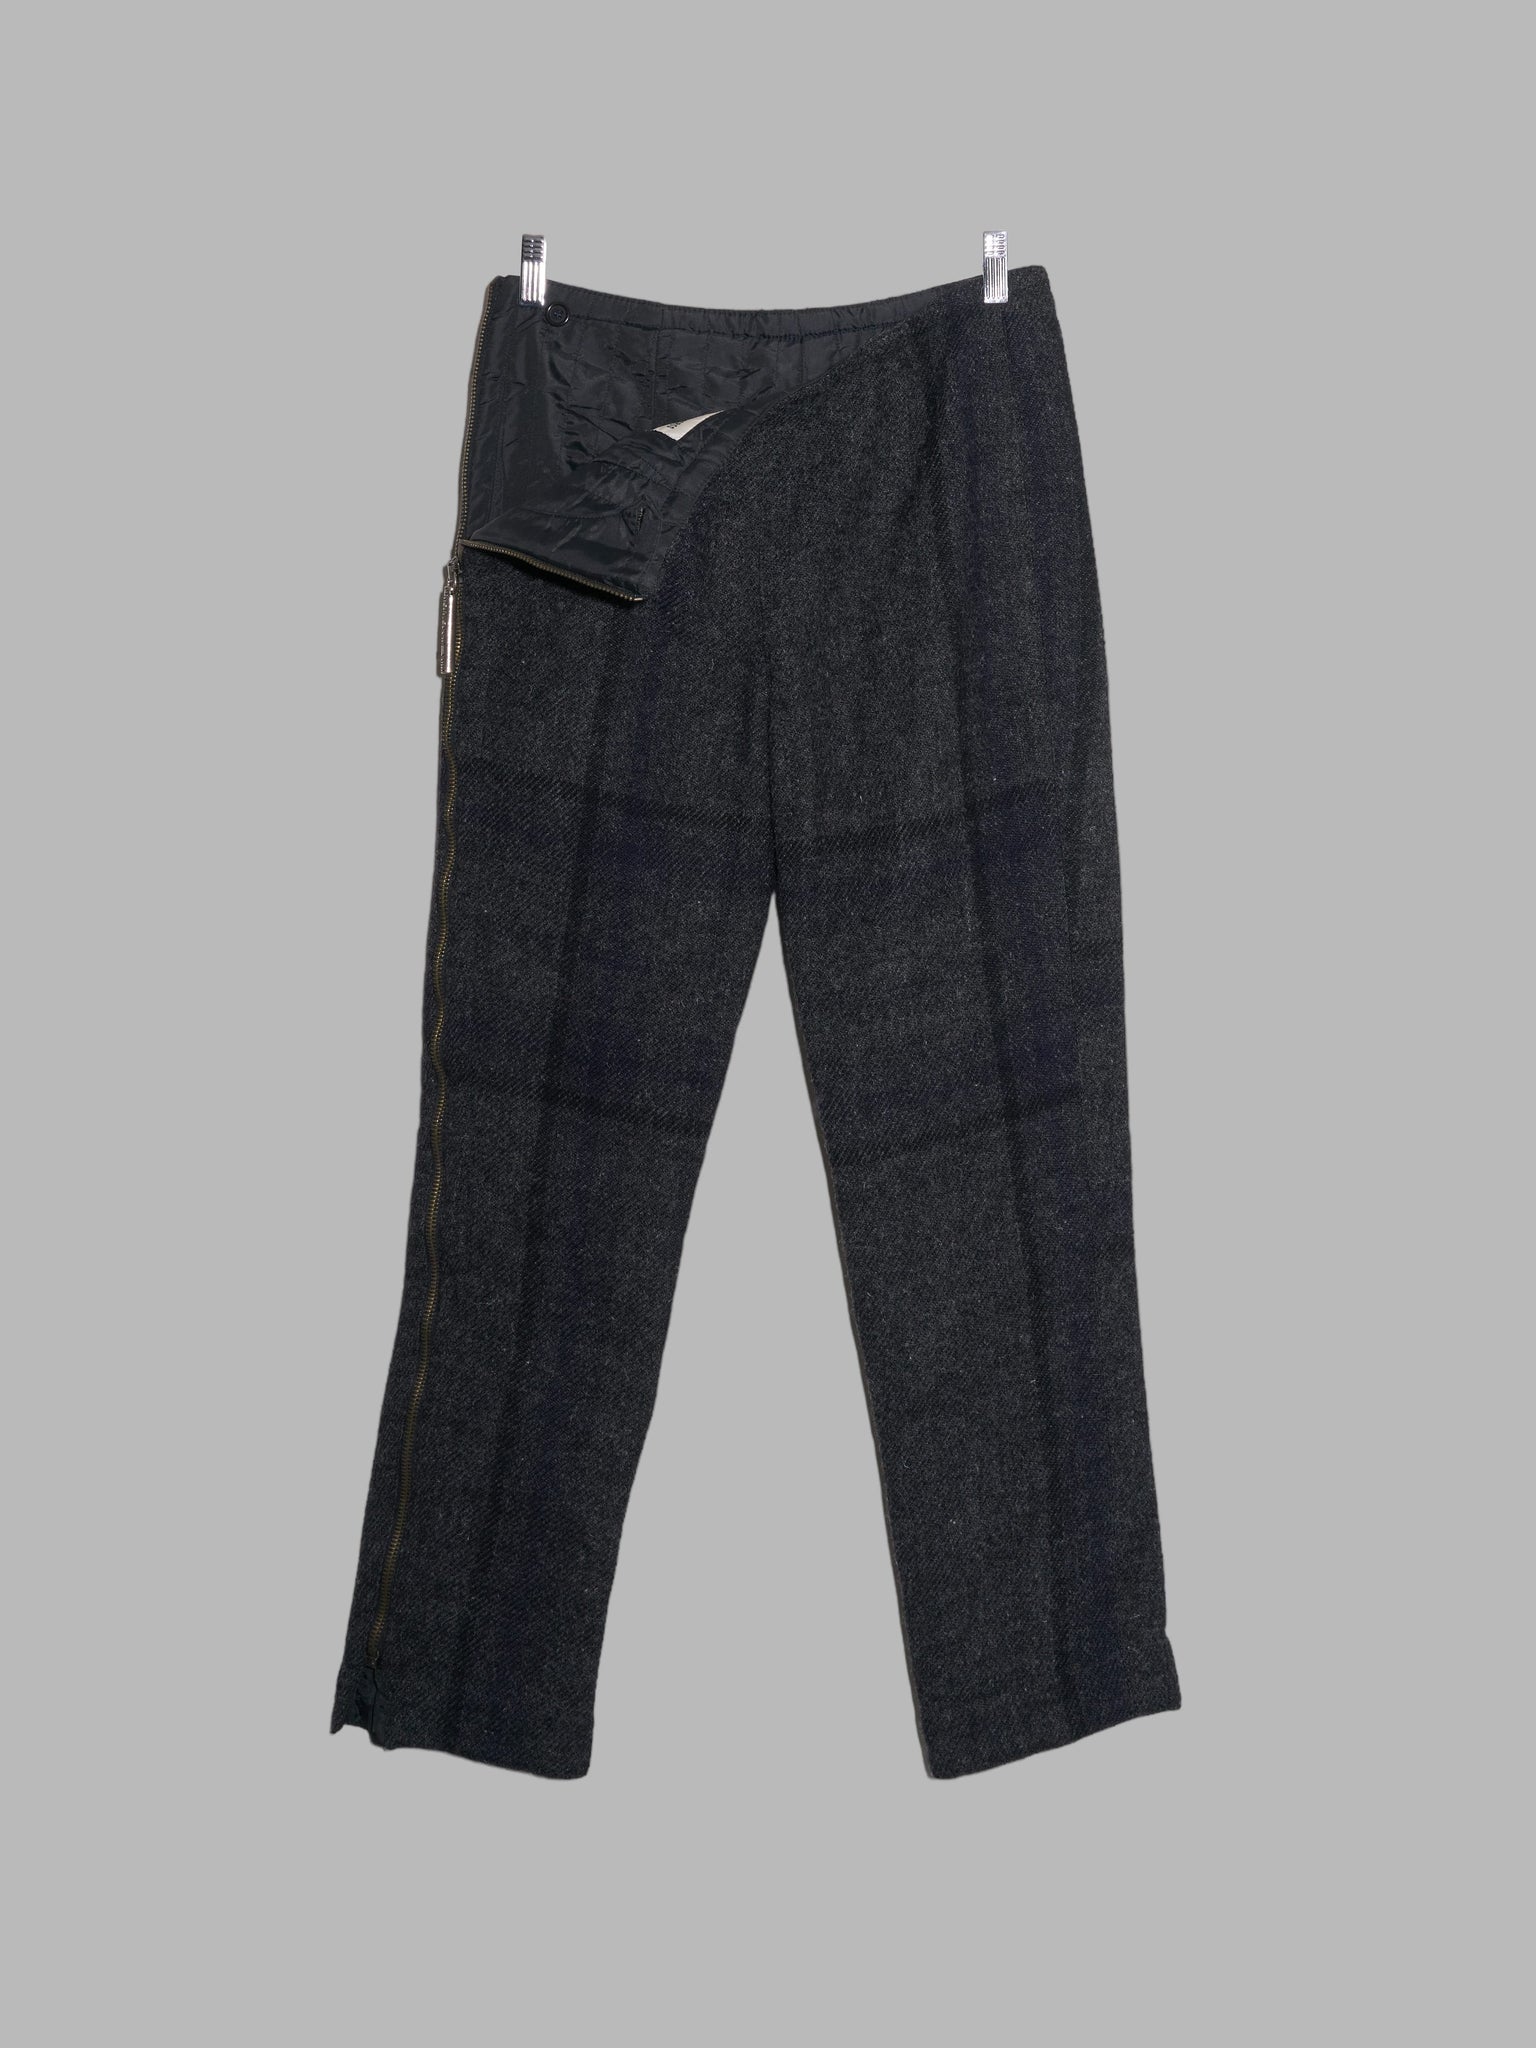 Dirk Bikkembergs Hommes 1990s charcoal wool plaid quilted side zip trousers - 46